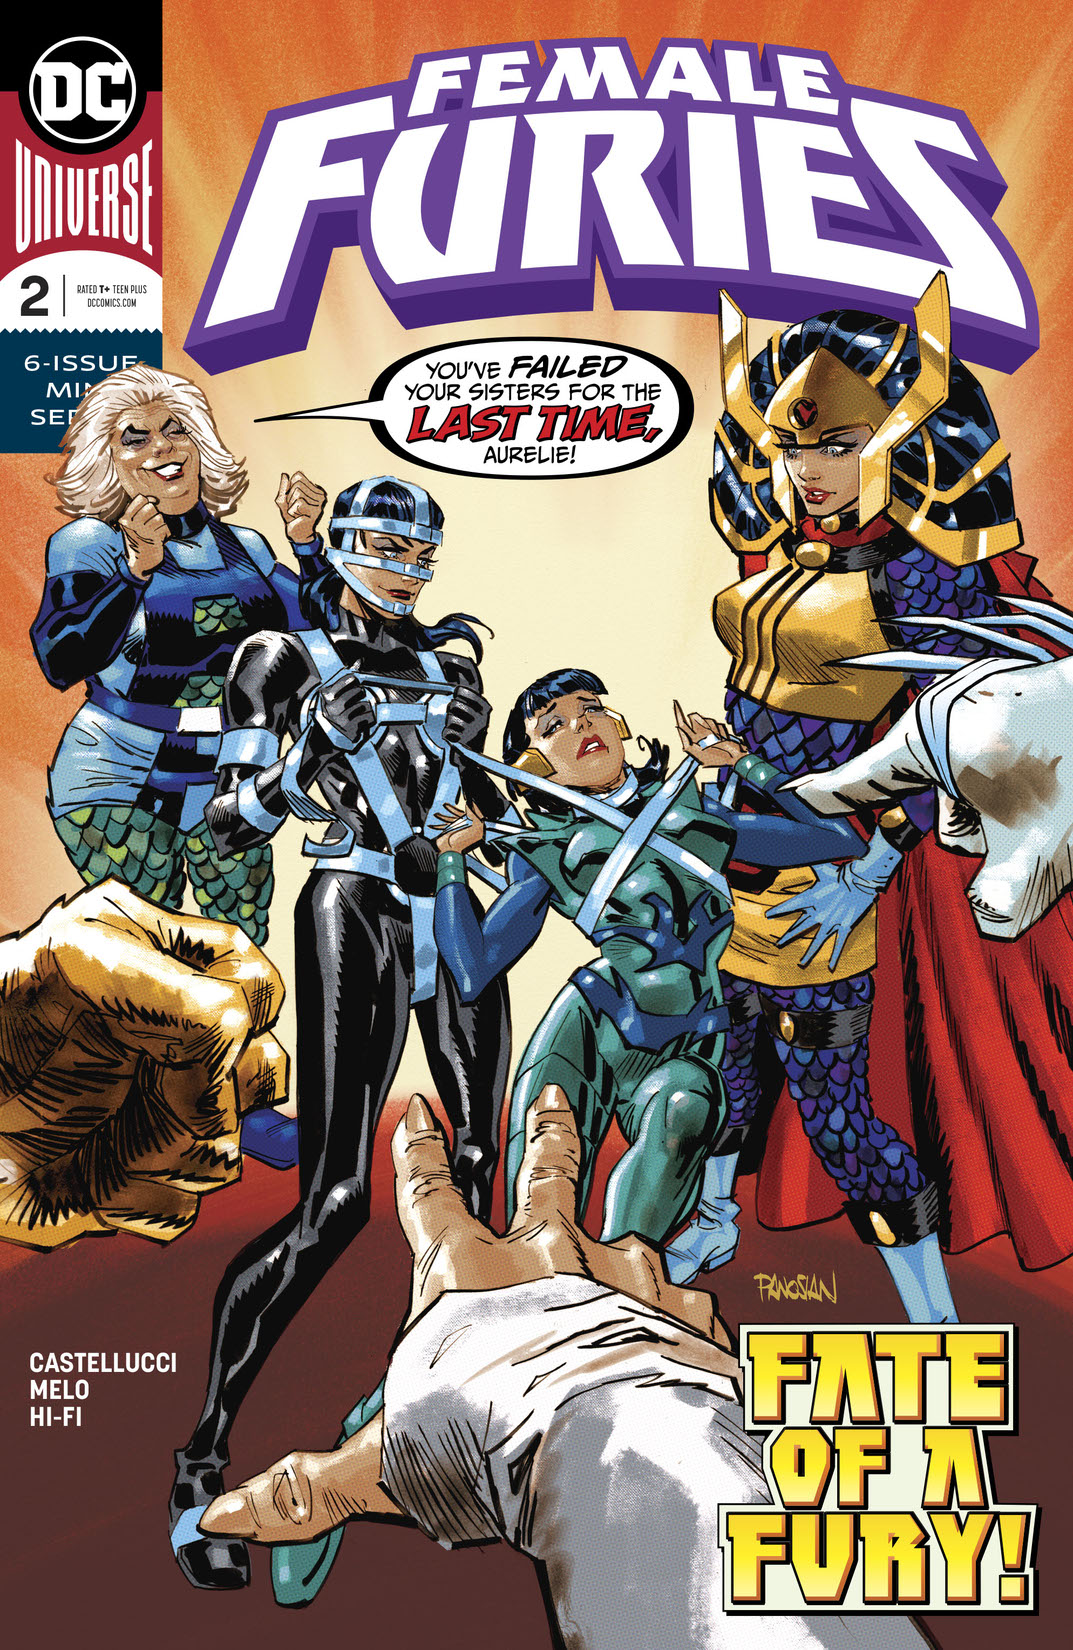 Female Furies #2 preview images